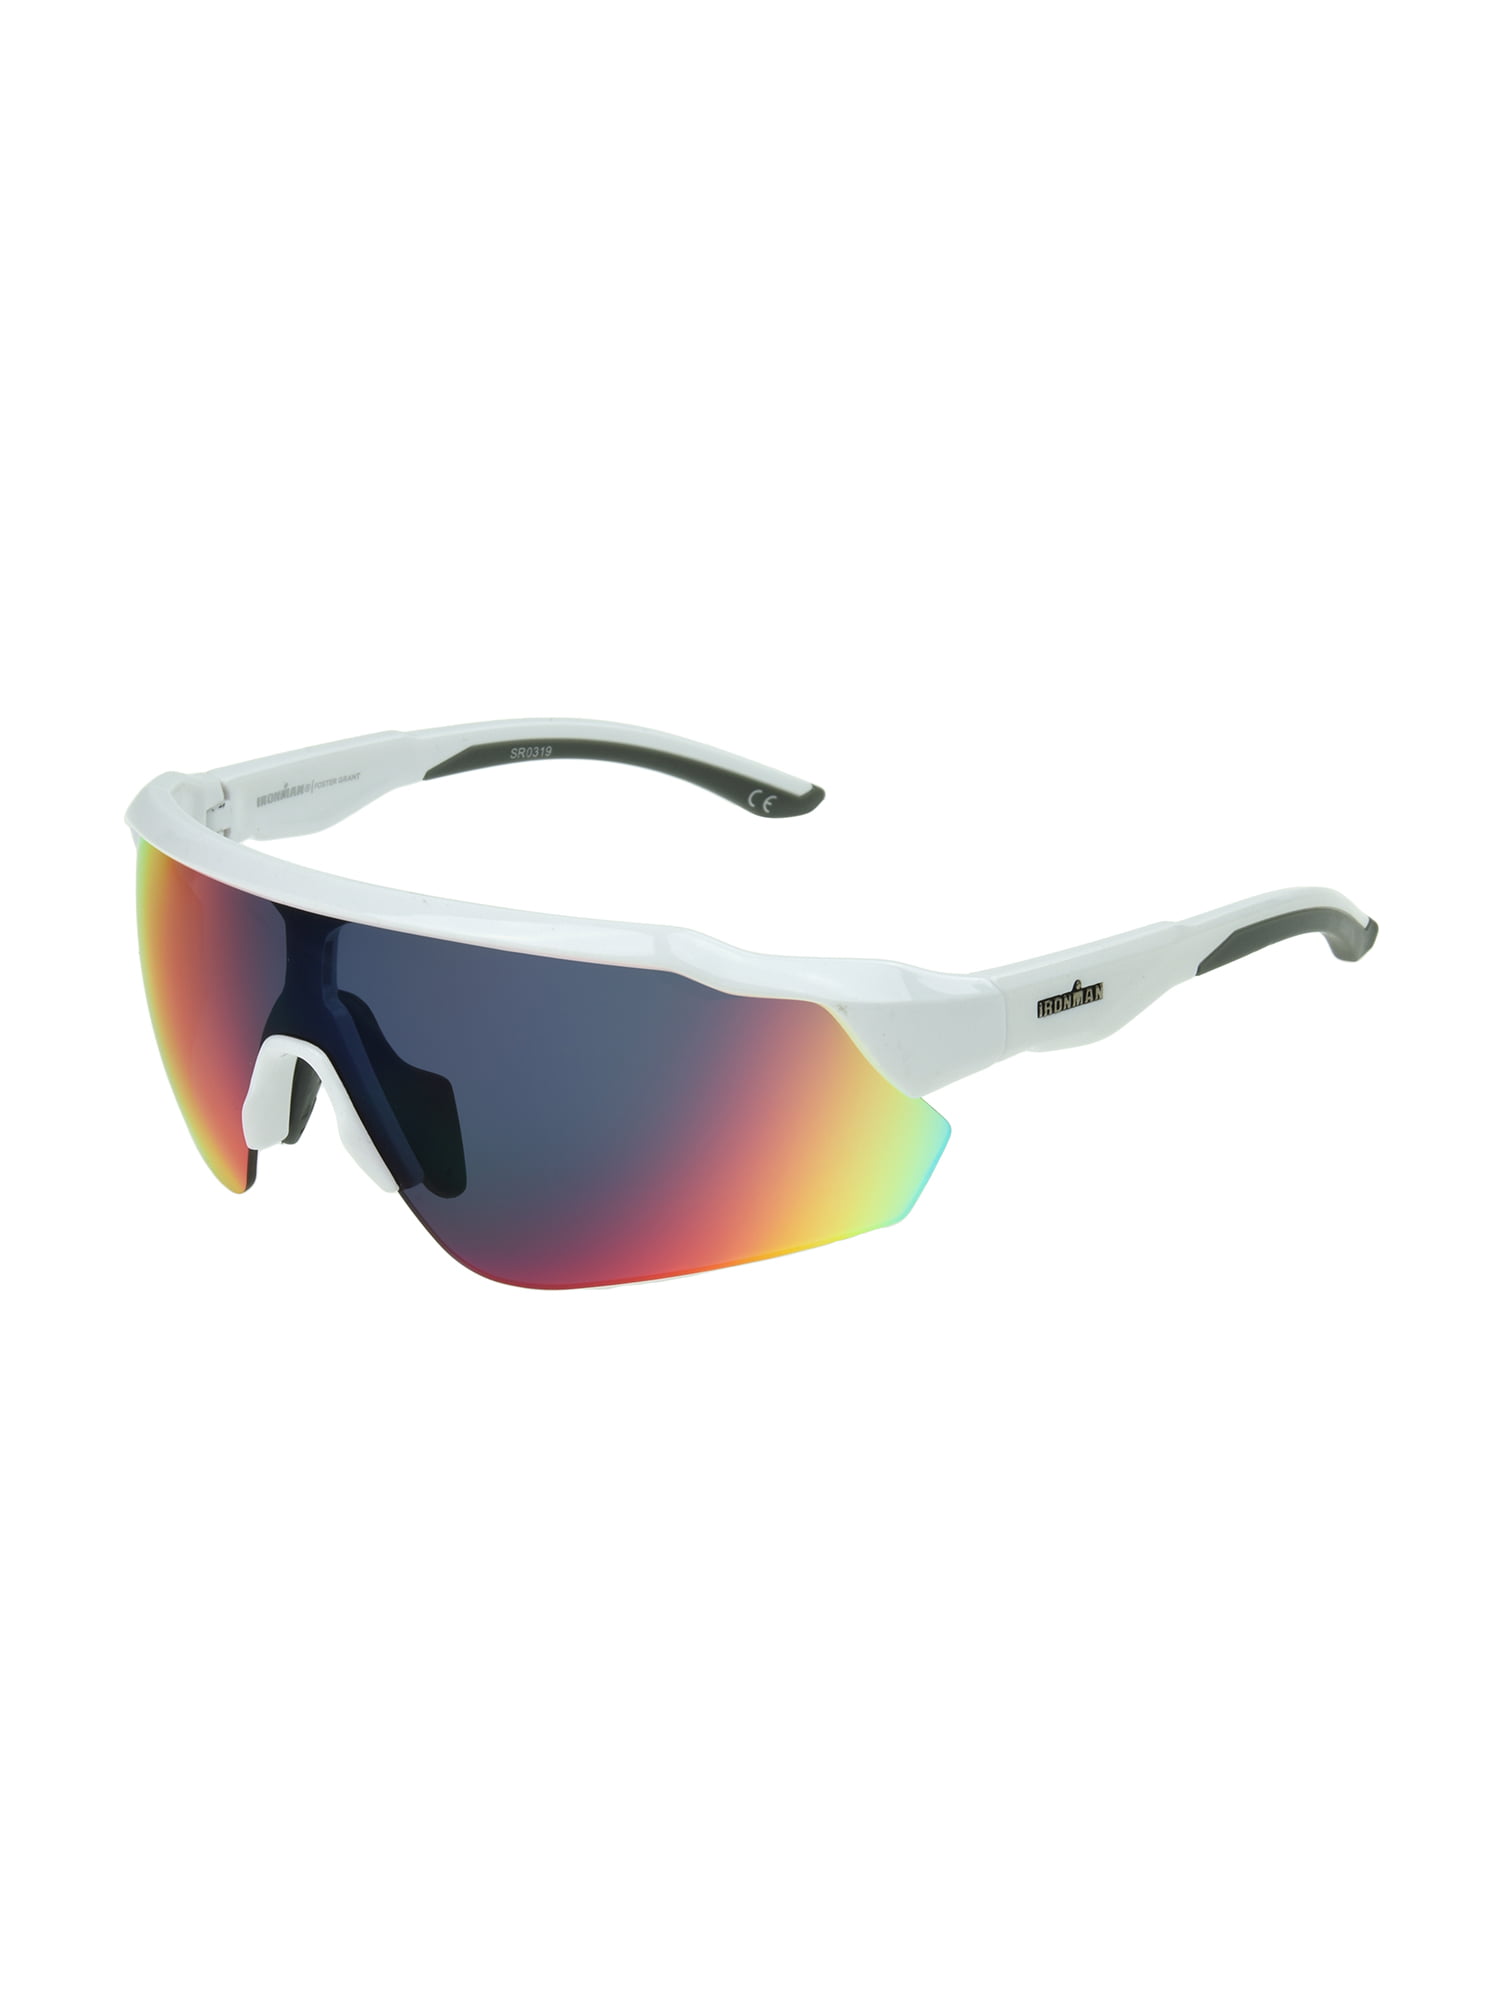 Rasslor OOO YEAH White Frame Gray Shield Sunglasses, White, adult unisex :  Amazon.in: Clothing & Accessories